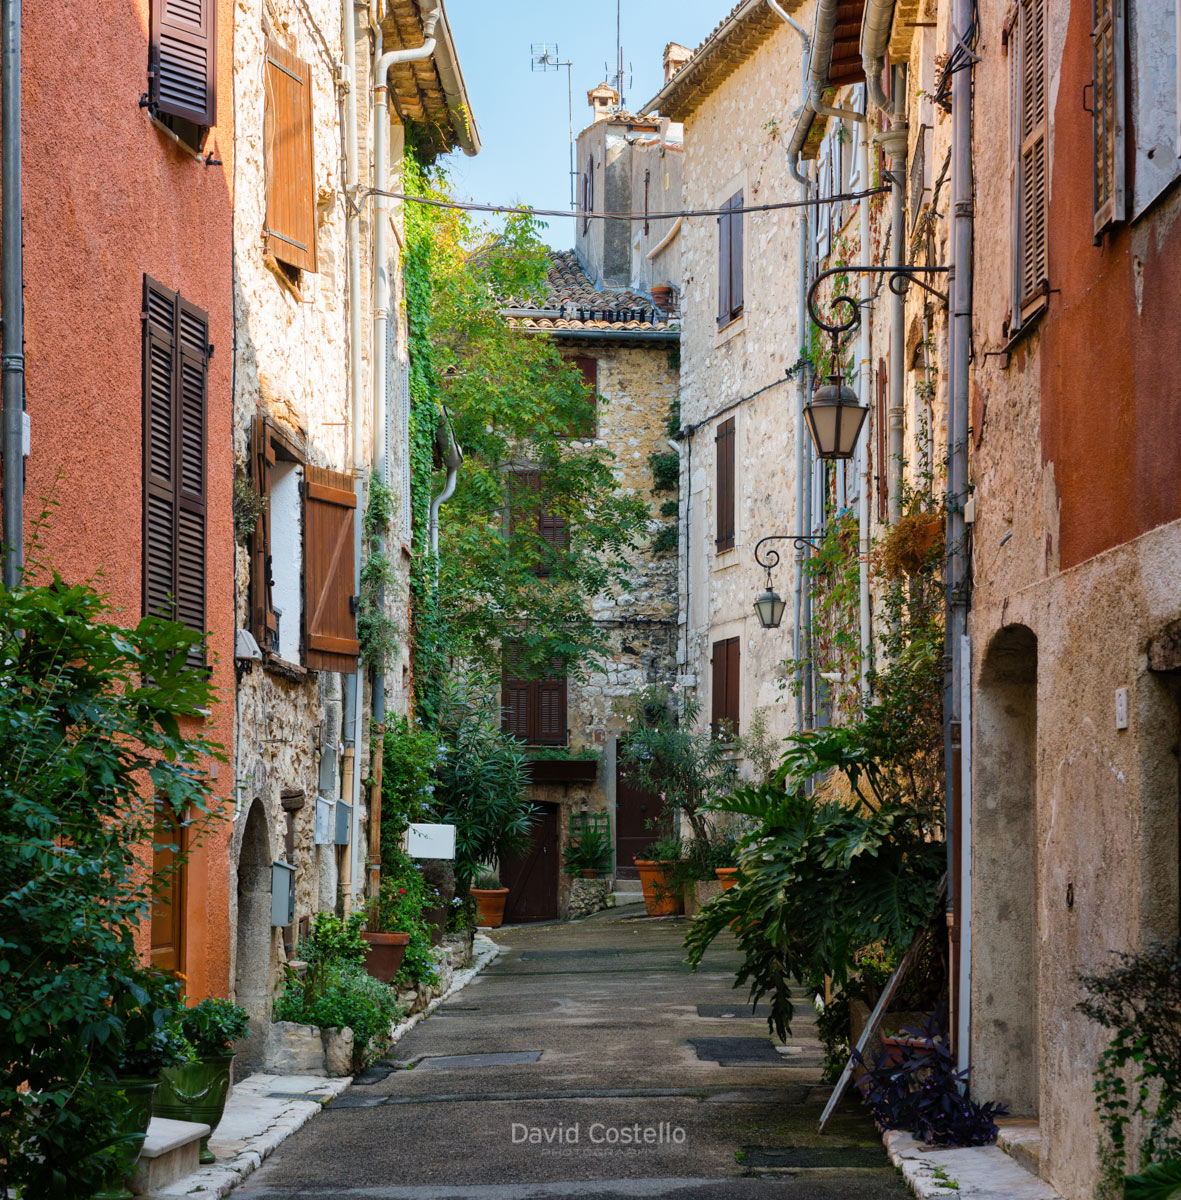 A living street within the walls of a 6th century town, that still grows and breathes as you look upon.